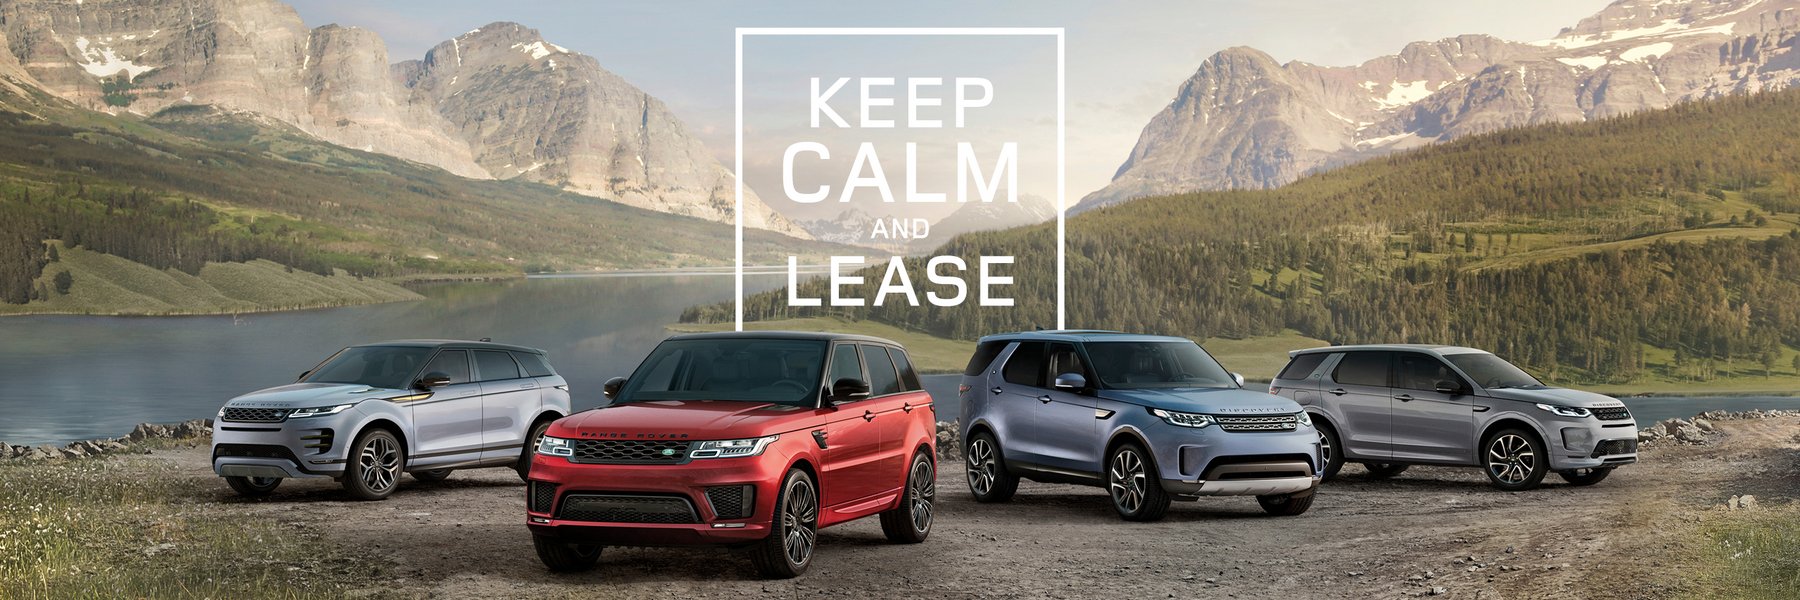 Land_Rover_Leasingaktion_Keep_Calm_And_Lease